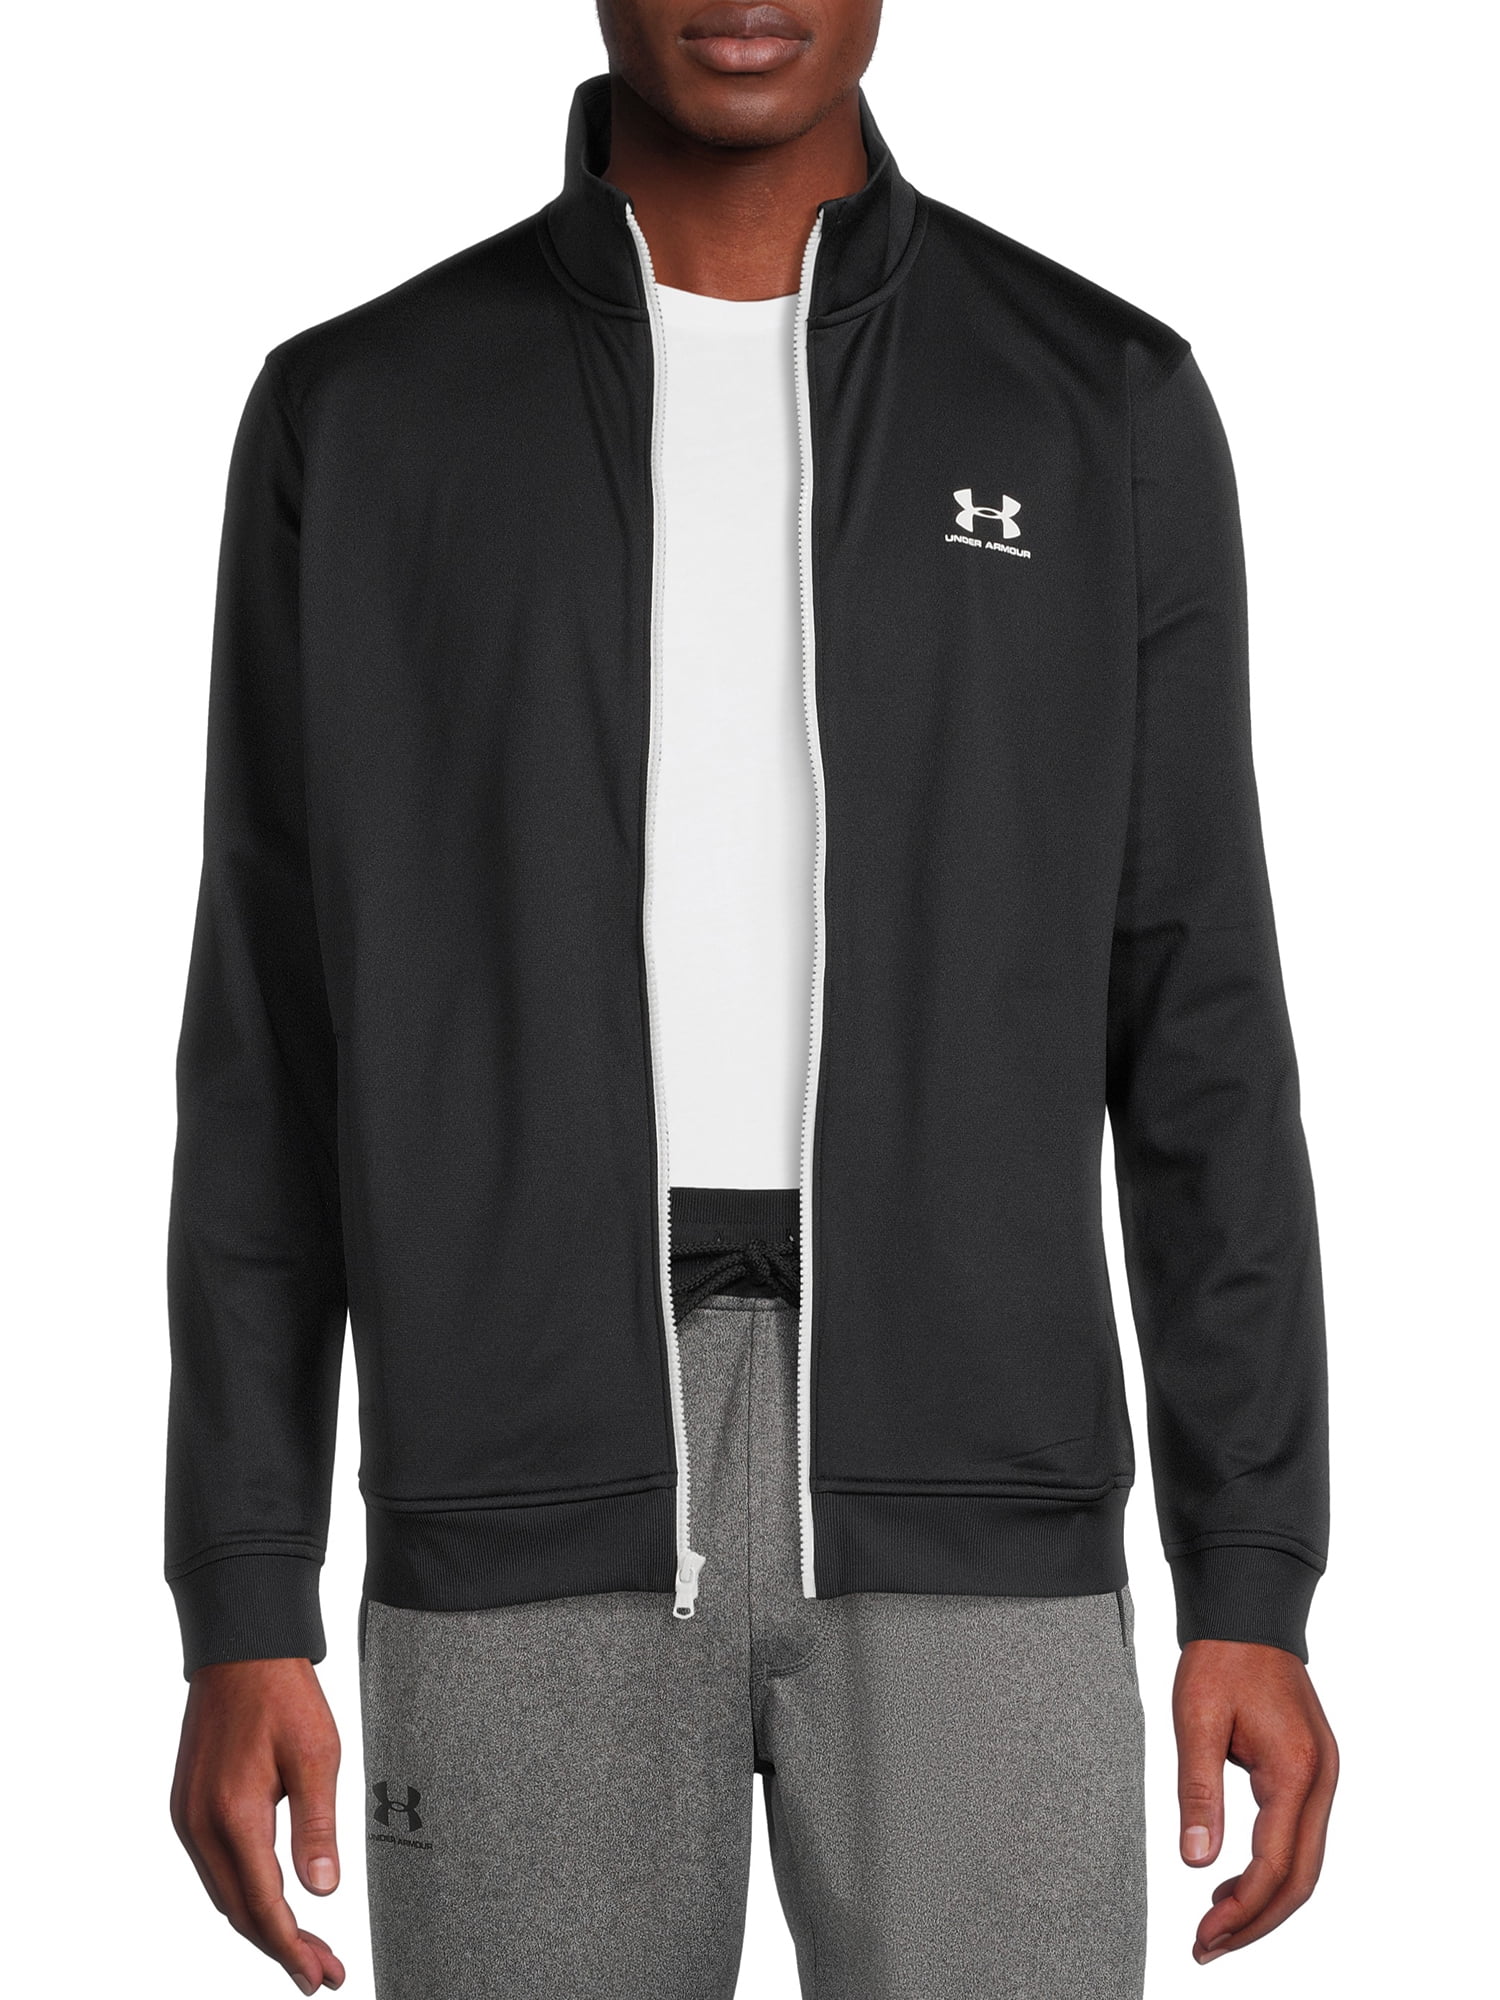 Under Armour Men's and Big Men's UA Sportstyle Tricot Track Jacket, up to  size 2XL 